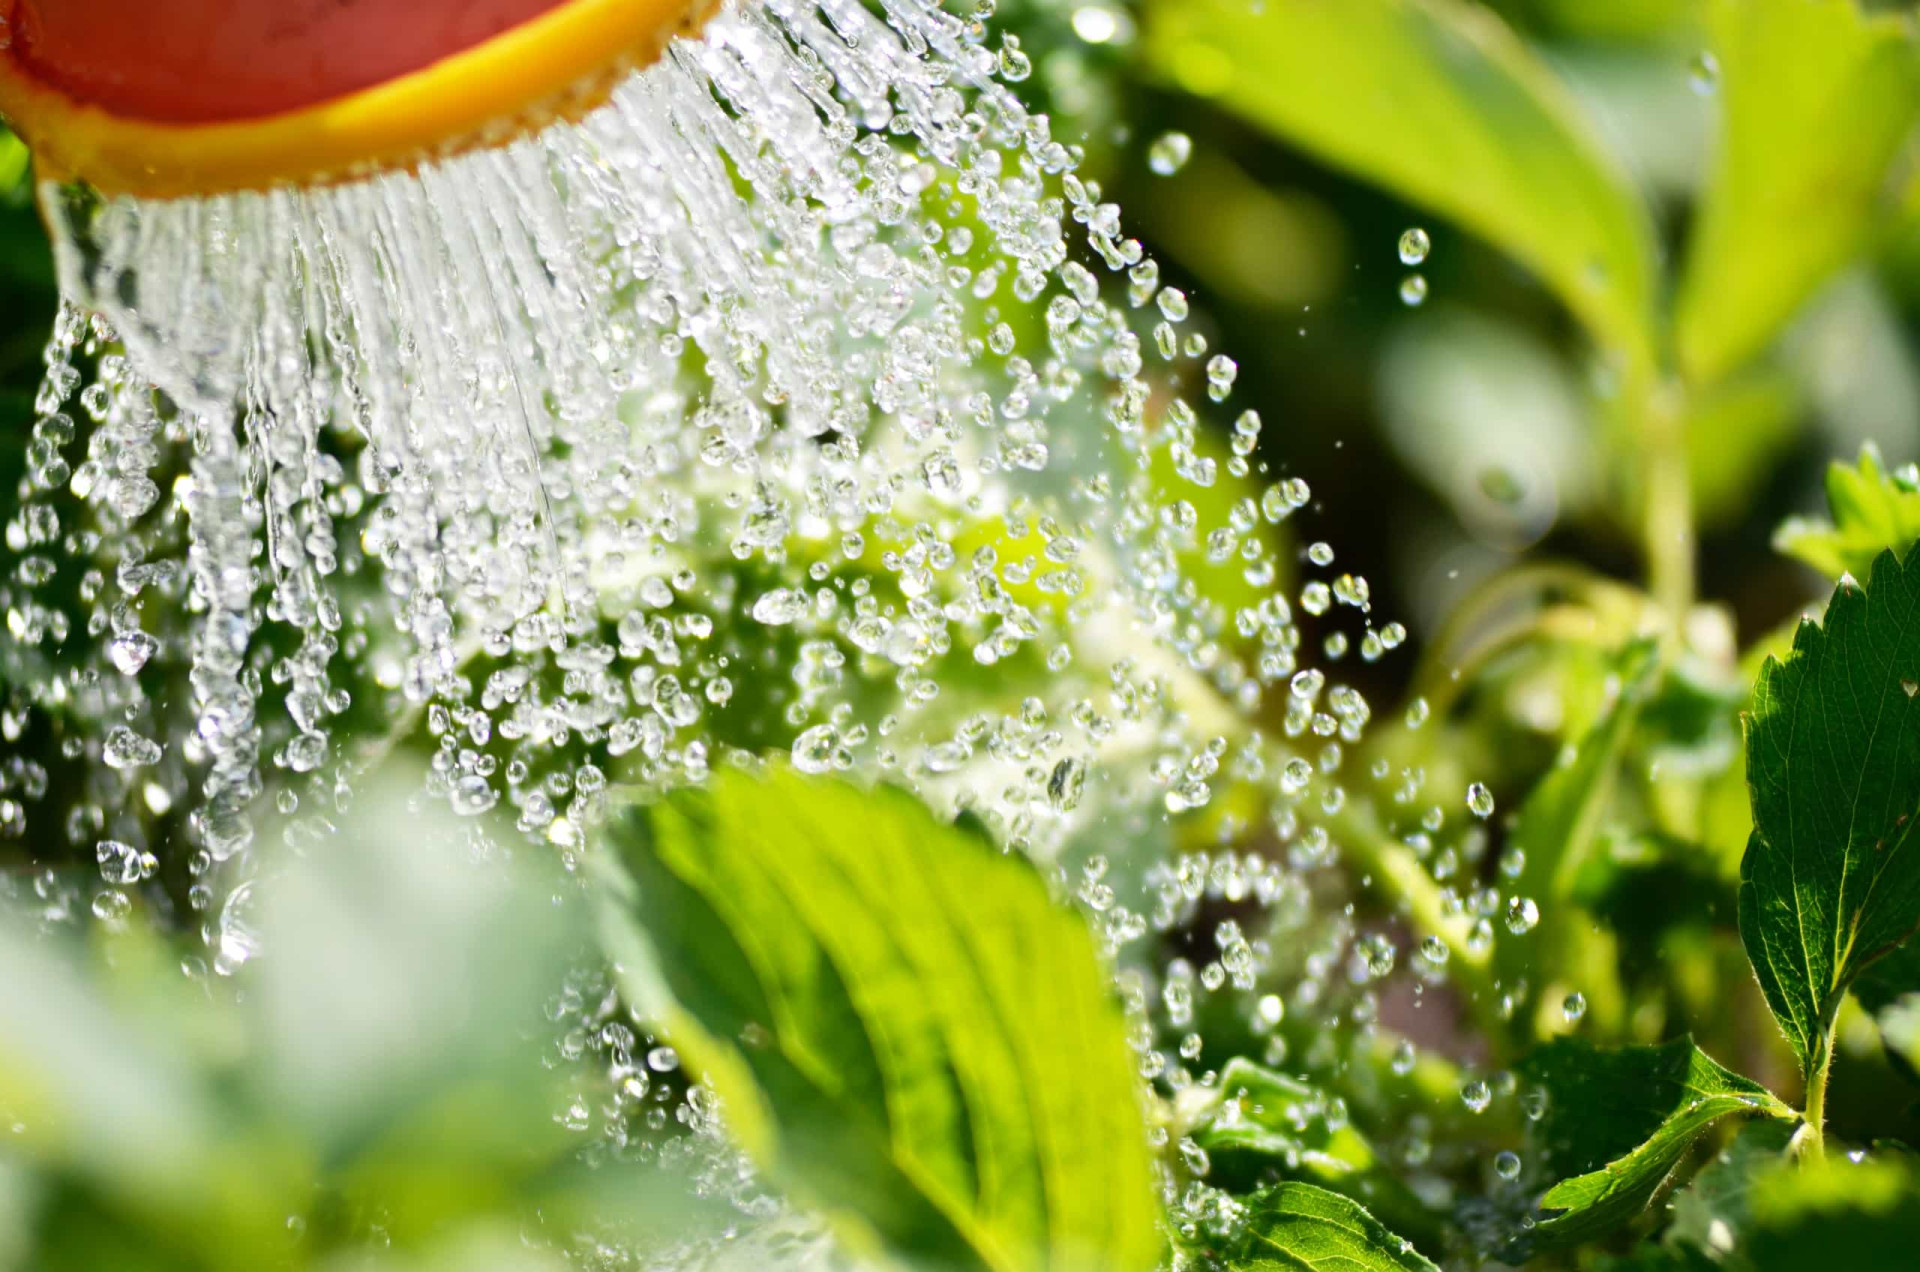 <p>Many garden mistakes revolve around watering. It's important to know that different seedlings and plants will require different amounts. If you water too much, plants can become waterlogged and roots can rot.</p><p>You may also like:<a href="https://www.starsinsider.com/n/191528?utm_source=msn.com&utm_medium=display&utm_campaign=referral_description&utm_content=491515en-us"> Australia's most notorious serial killers</a></p>